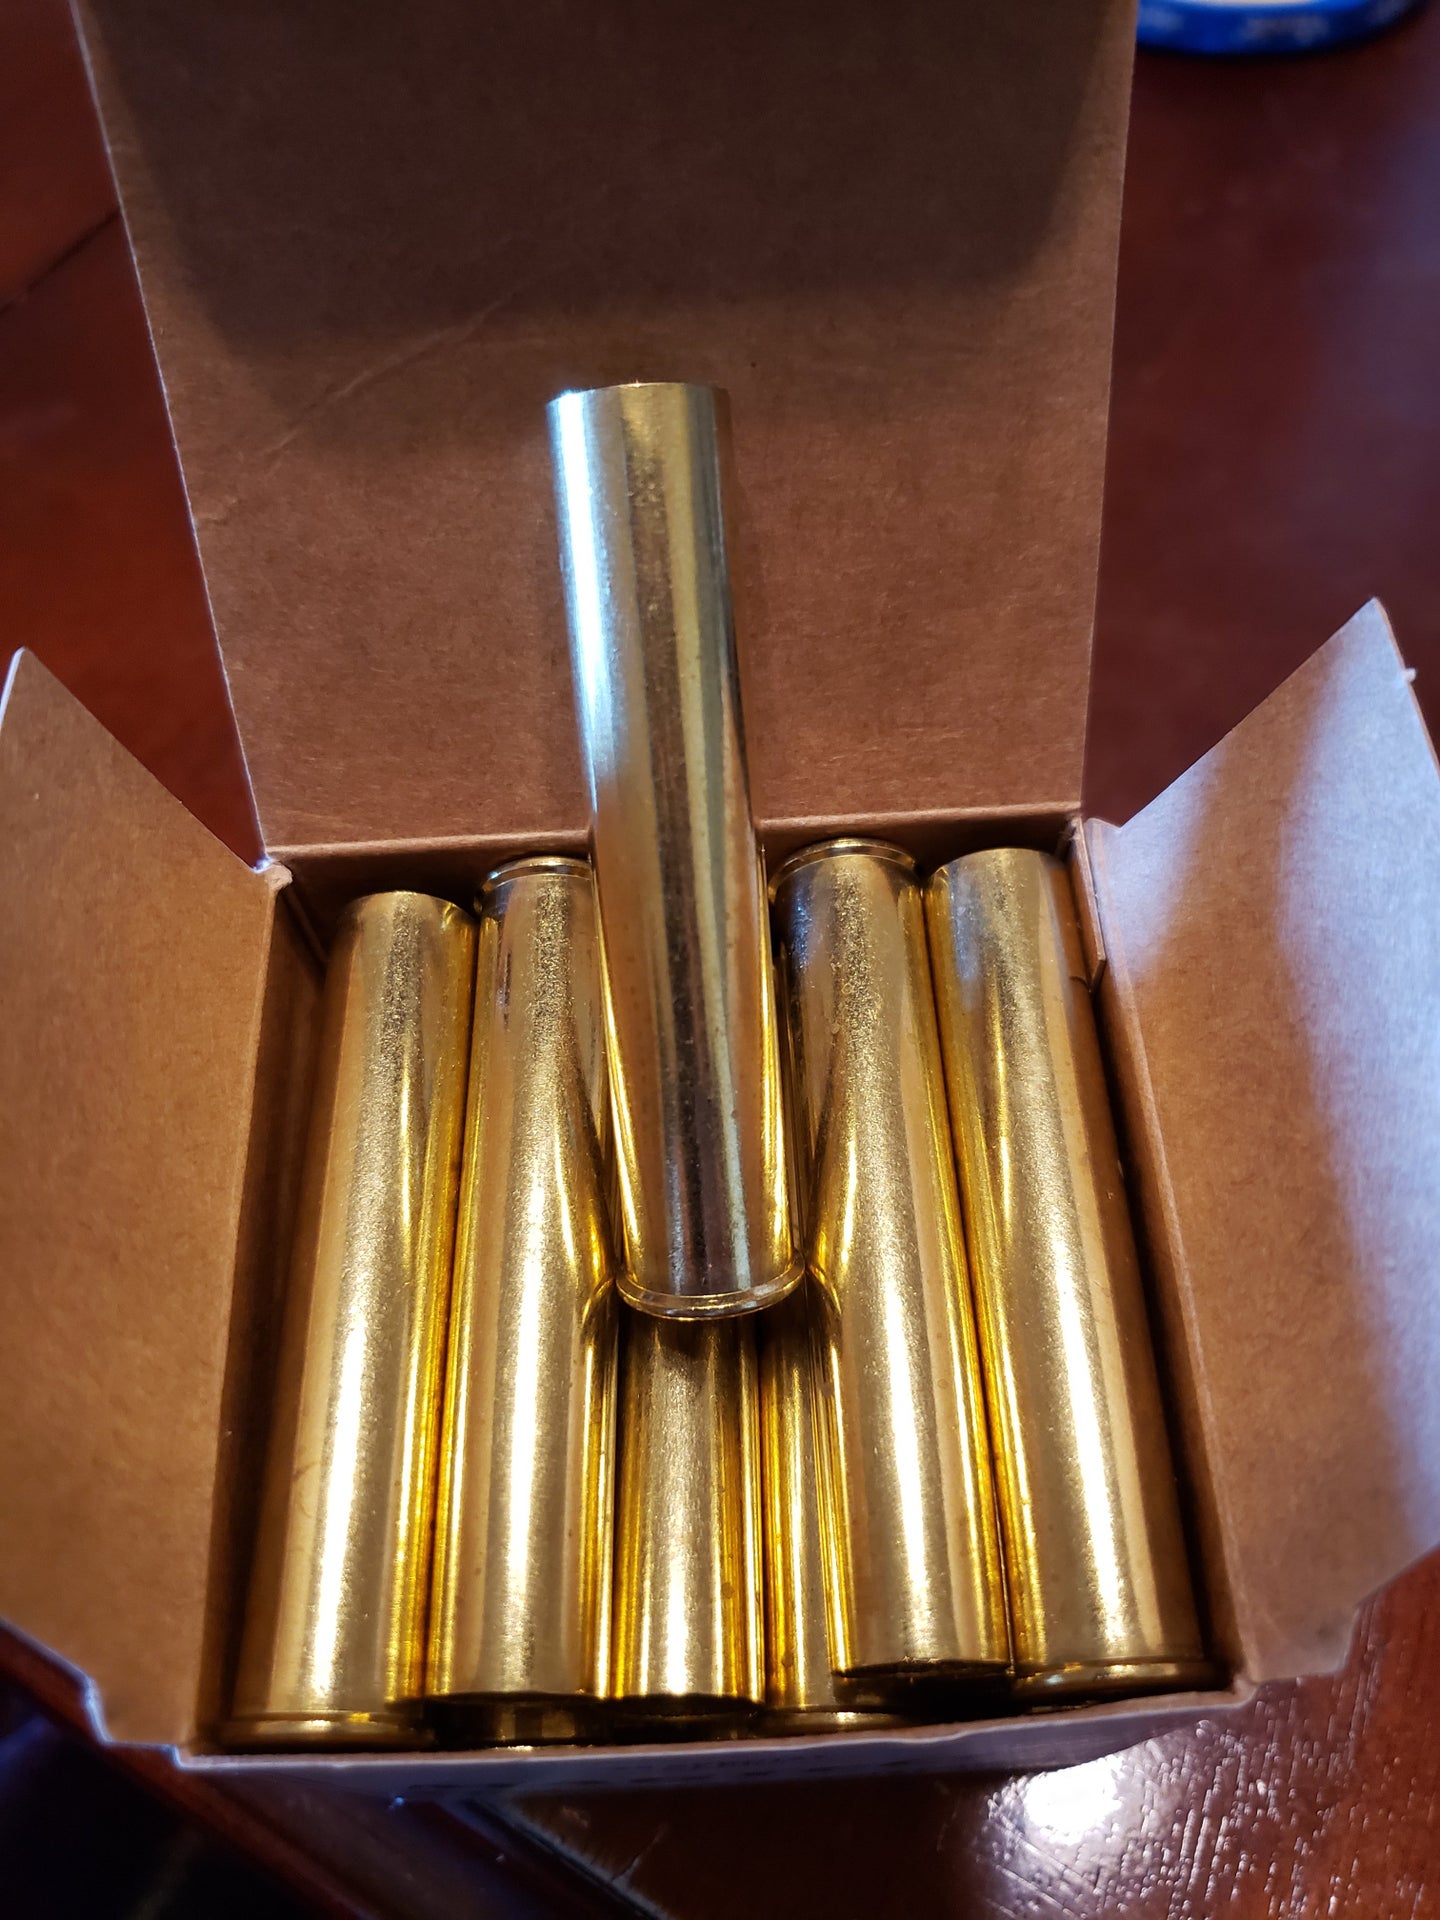 2 Boxes New Magtech 410 Brass Cases F/S